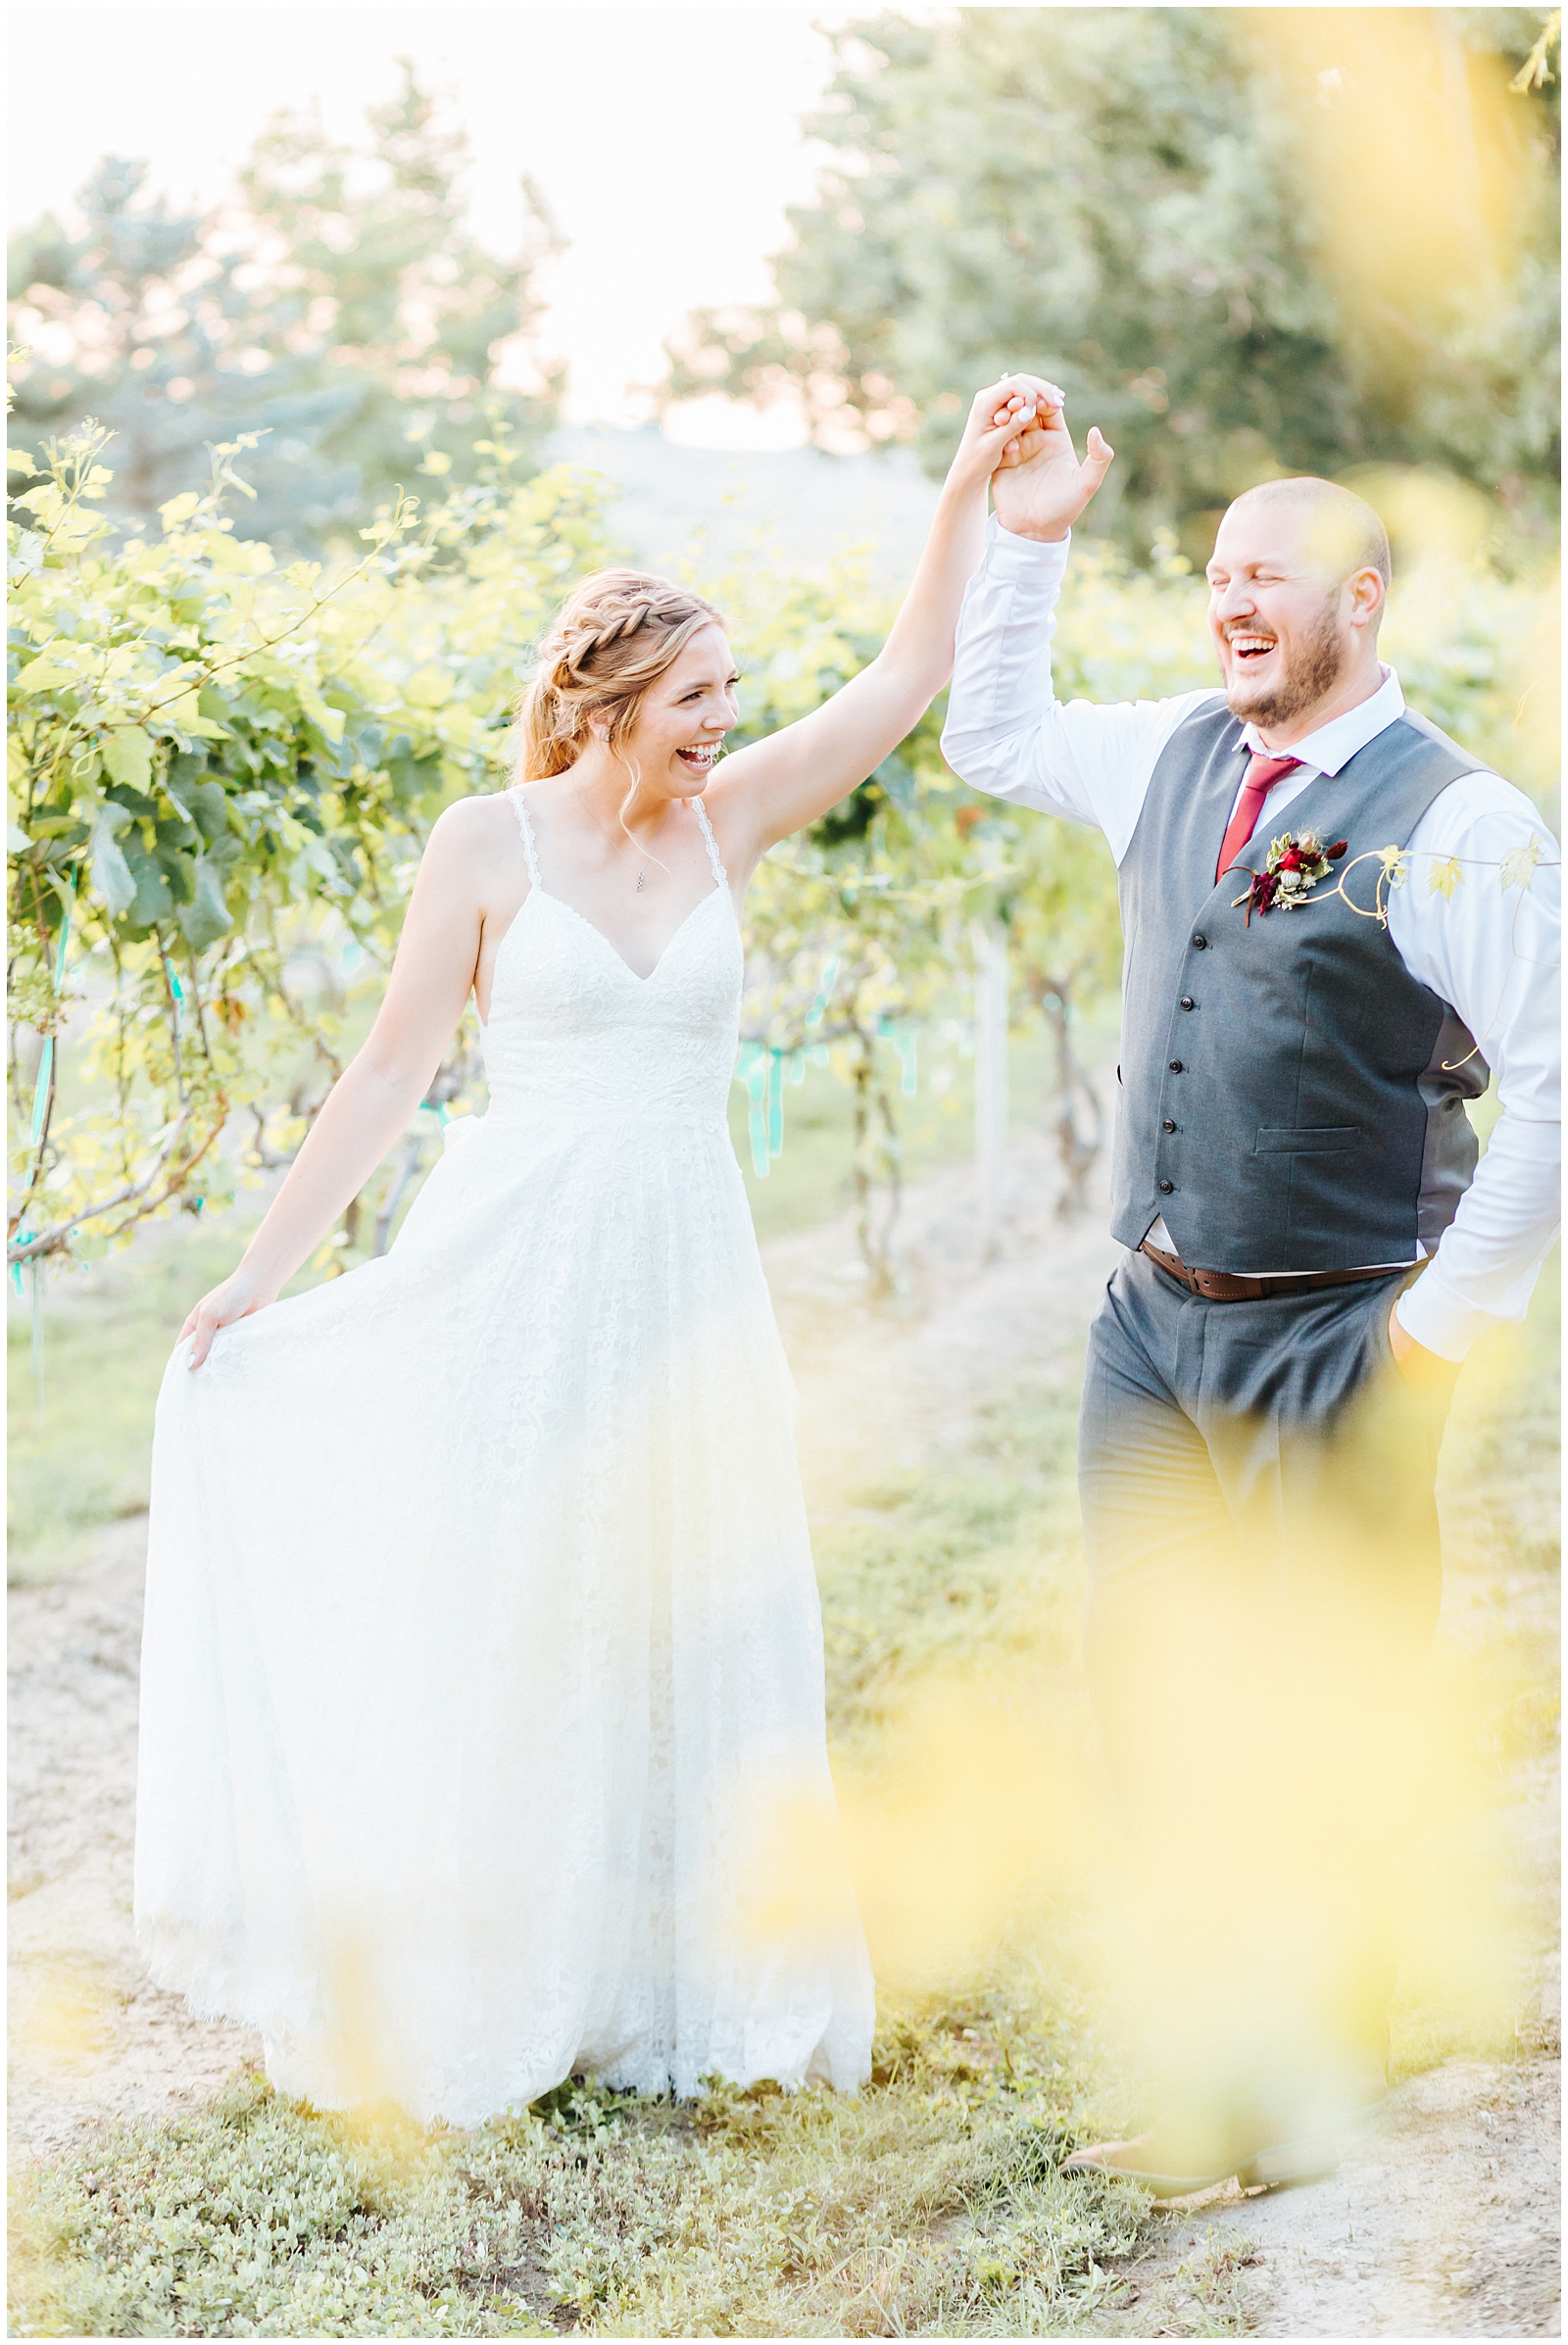 Giggles and Laughter Between the bride and groom during vineyard portraits at Fox Canyon Vineyards Wedding